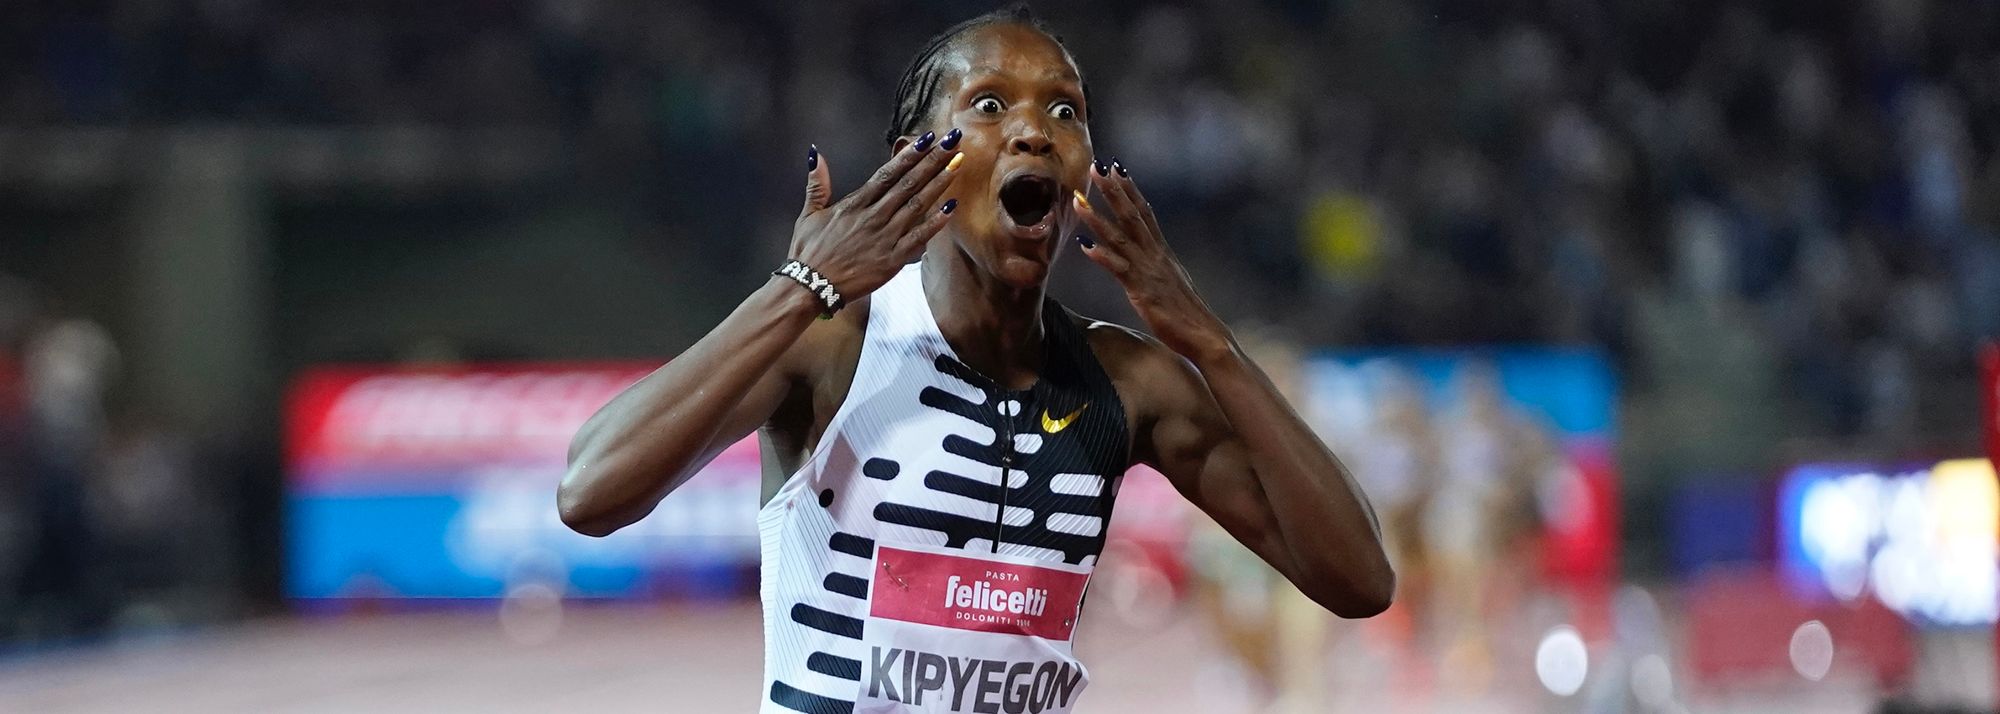 Kenya’s Faith Kipyegon captured the world record she had been hunting, winning the women’s 1500m in a stunning 3:49.11 at the Golden Gala, the third Wanda Diamond League meeting of the season, in Florence